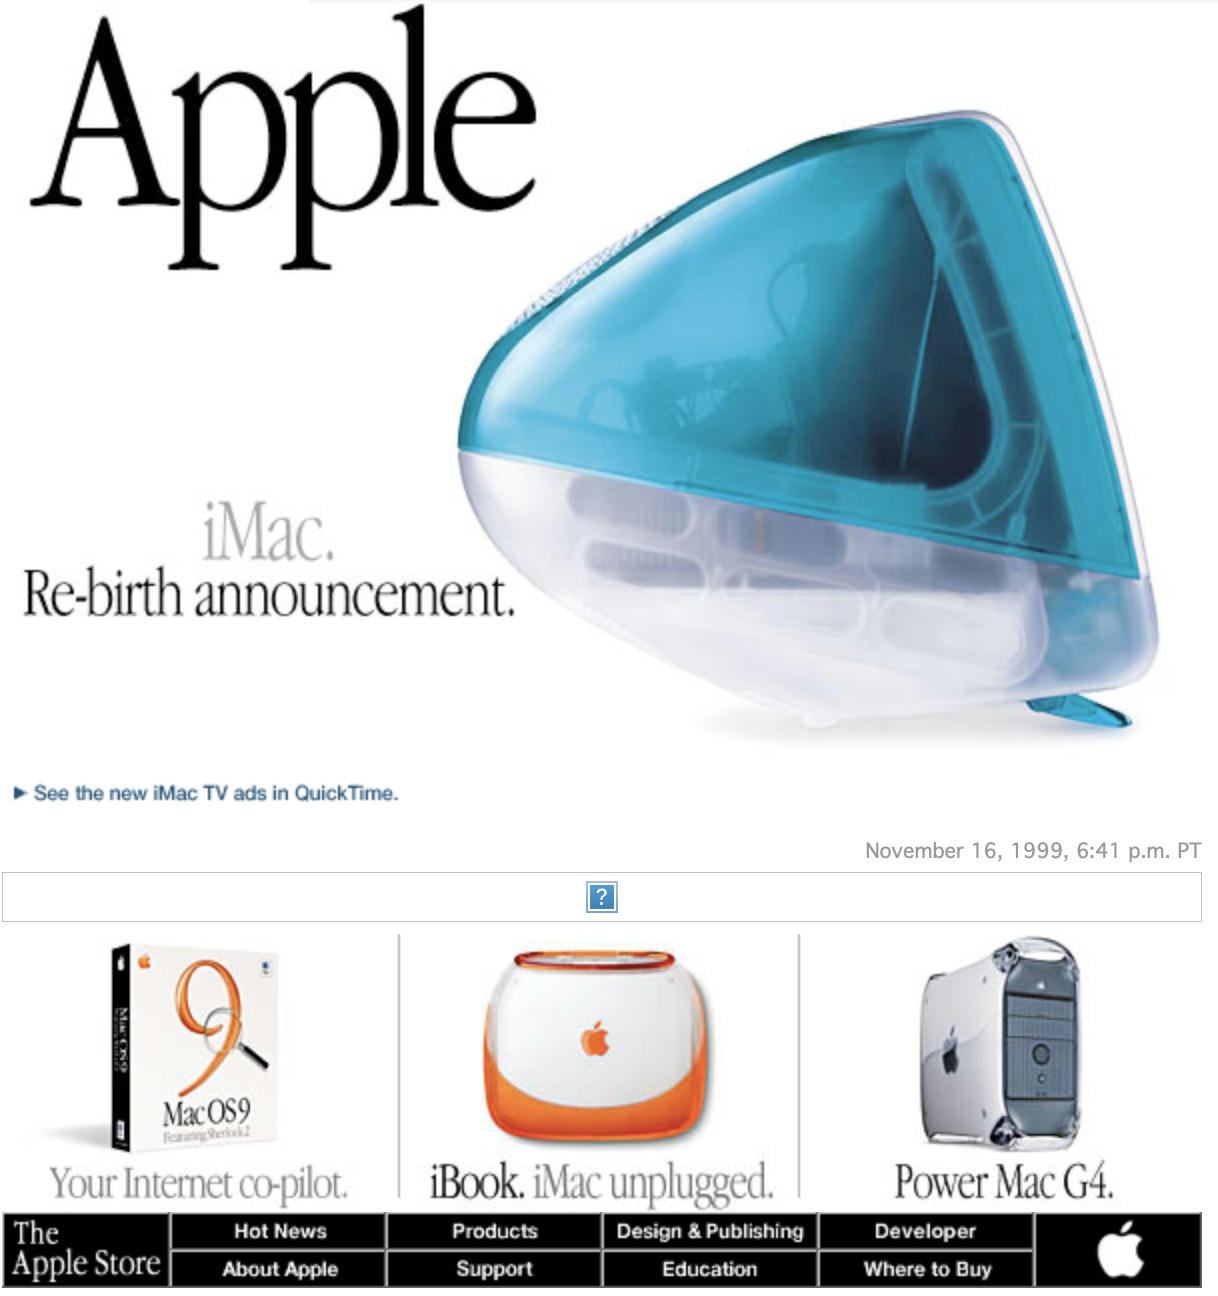 Image from Apple Web site in 1999 showing graphic elements as text